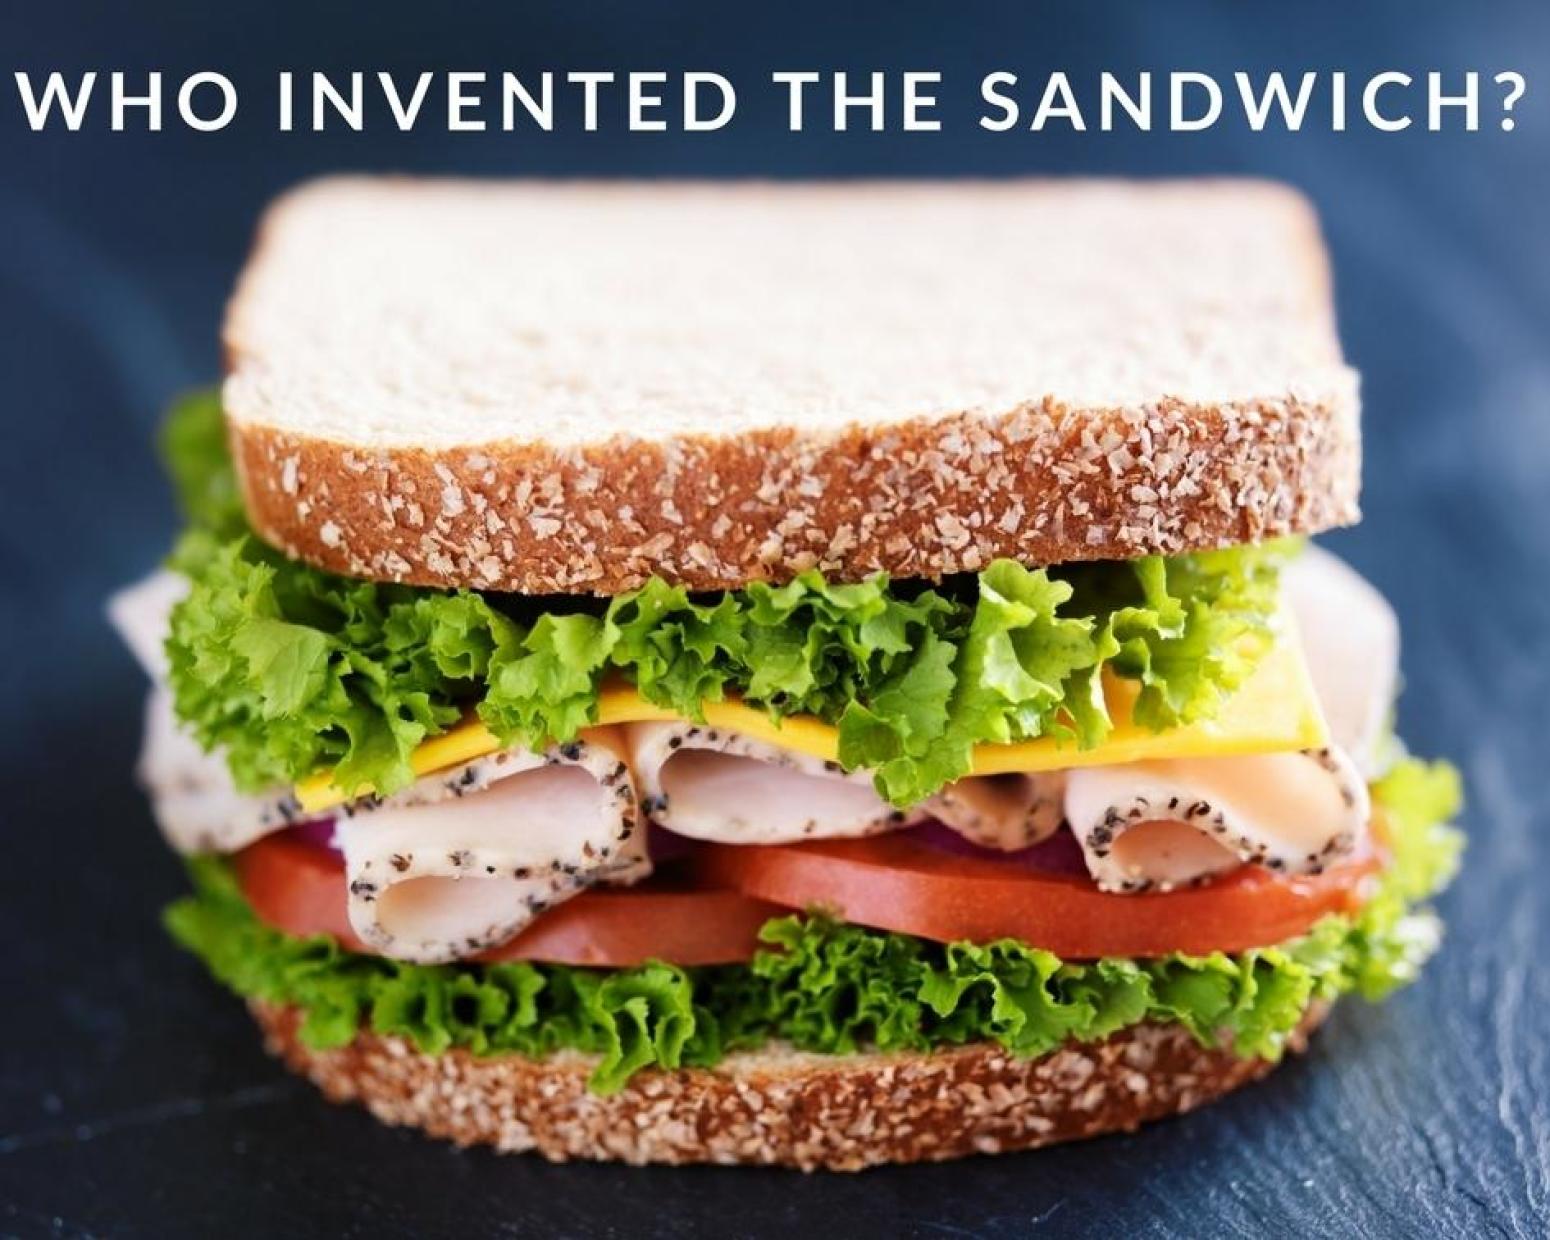 Who Invented the Sandwich?